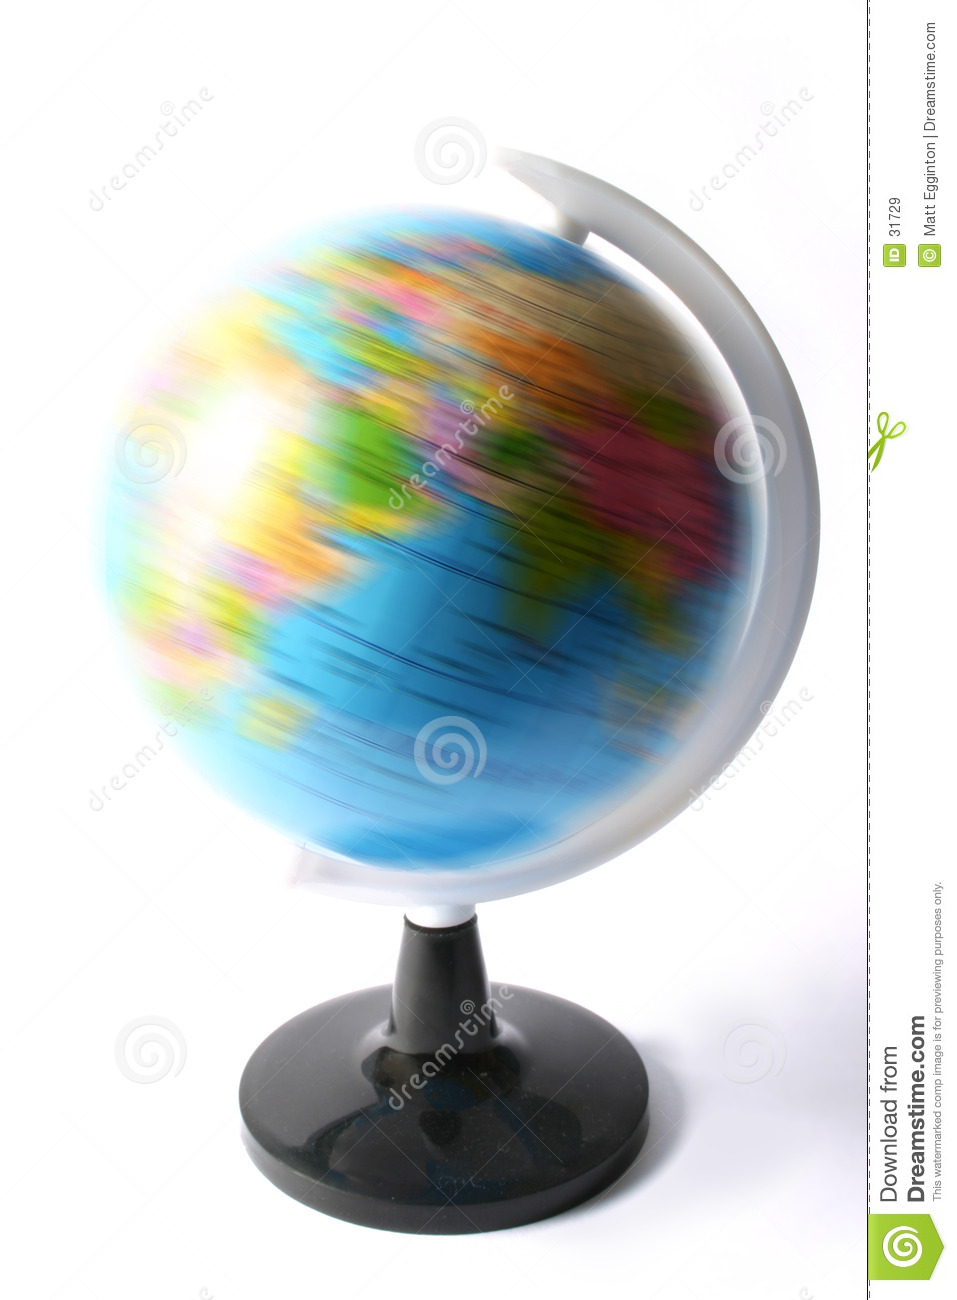 Spinning Political Globe   Atals  Their Is Motion Blur On The Globe